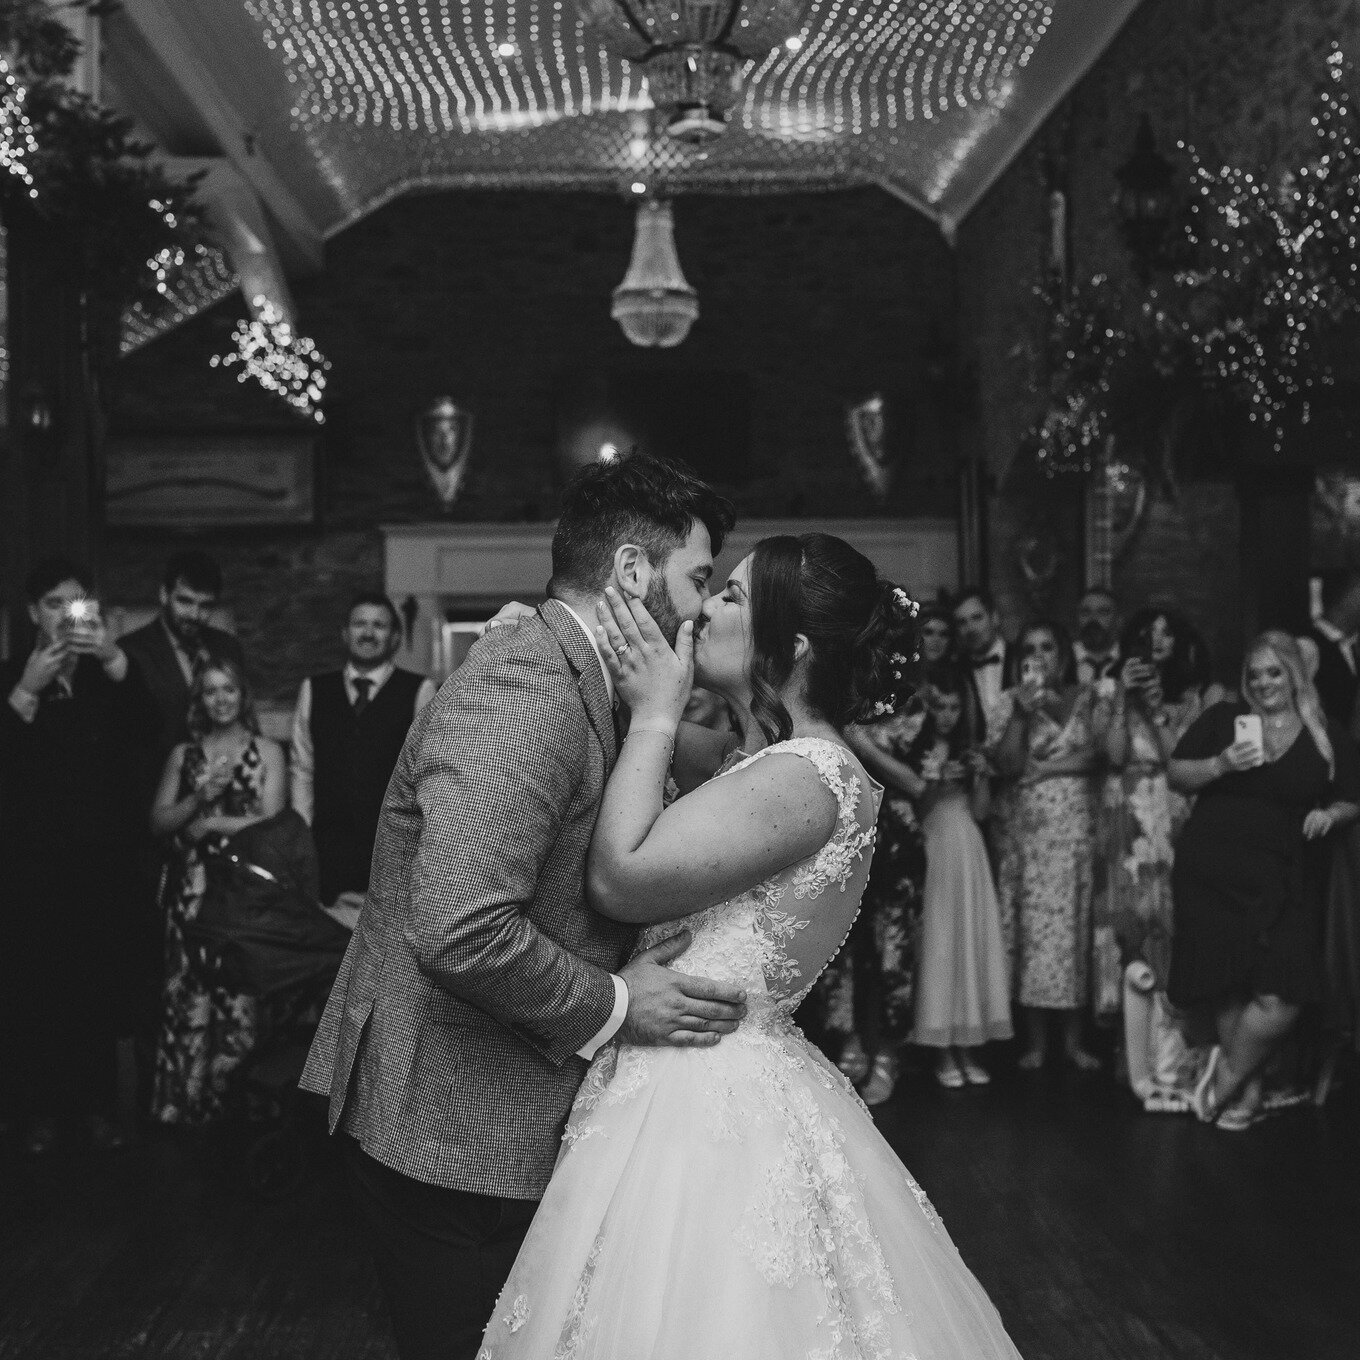 @darver_castle dancing to finishing a wonderful wedding @aineeee_x @jmccourt12 

Dress: Blue Lace Bridal 
Bridesmaid dresses: TFNC
Menswear: Balmoral Mens Wedding and Formal Hire 
Florist: Lets Face It Creation - Foam Flowers 
Cars: David Andrews Wed